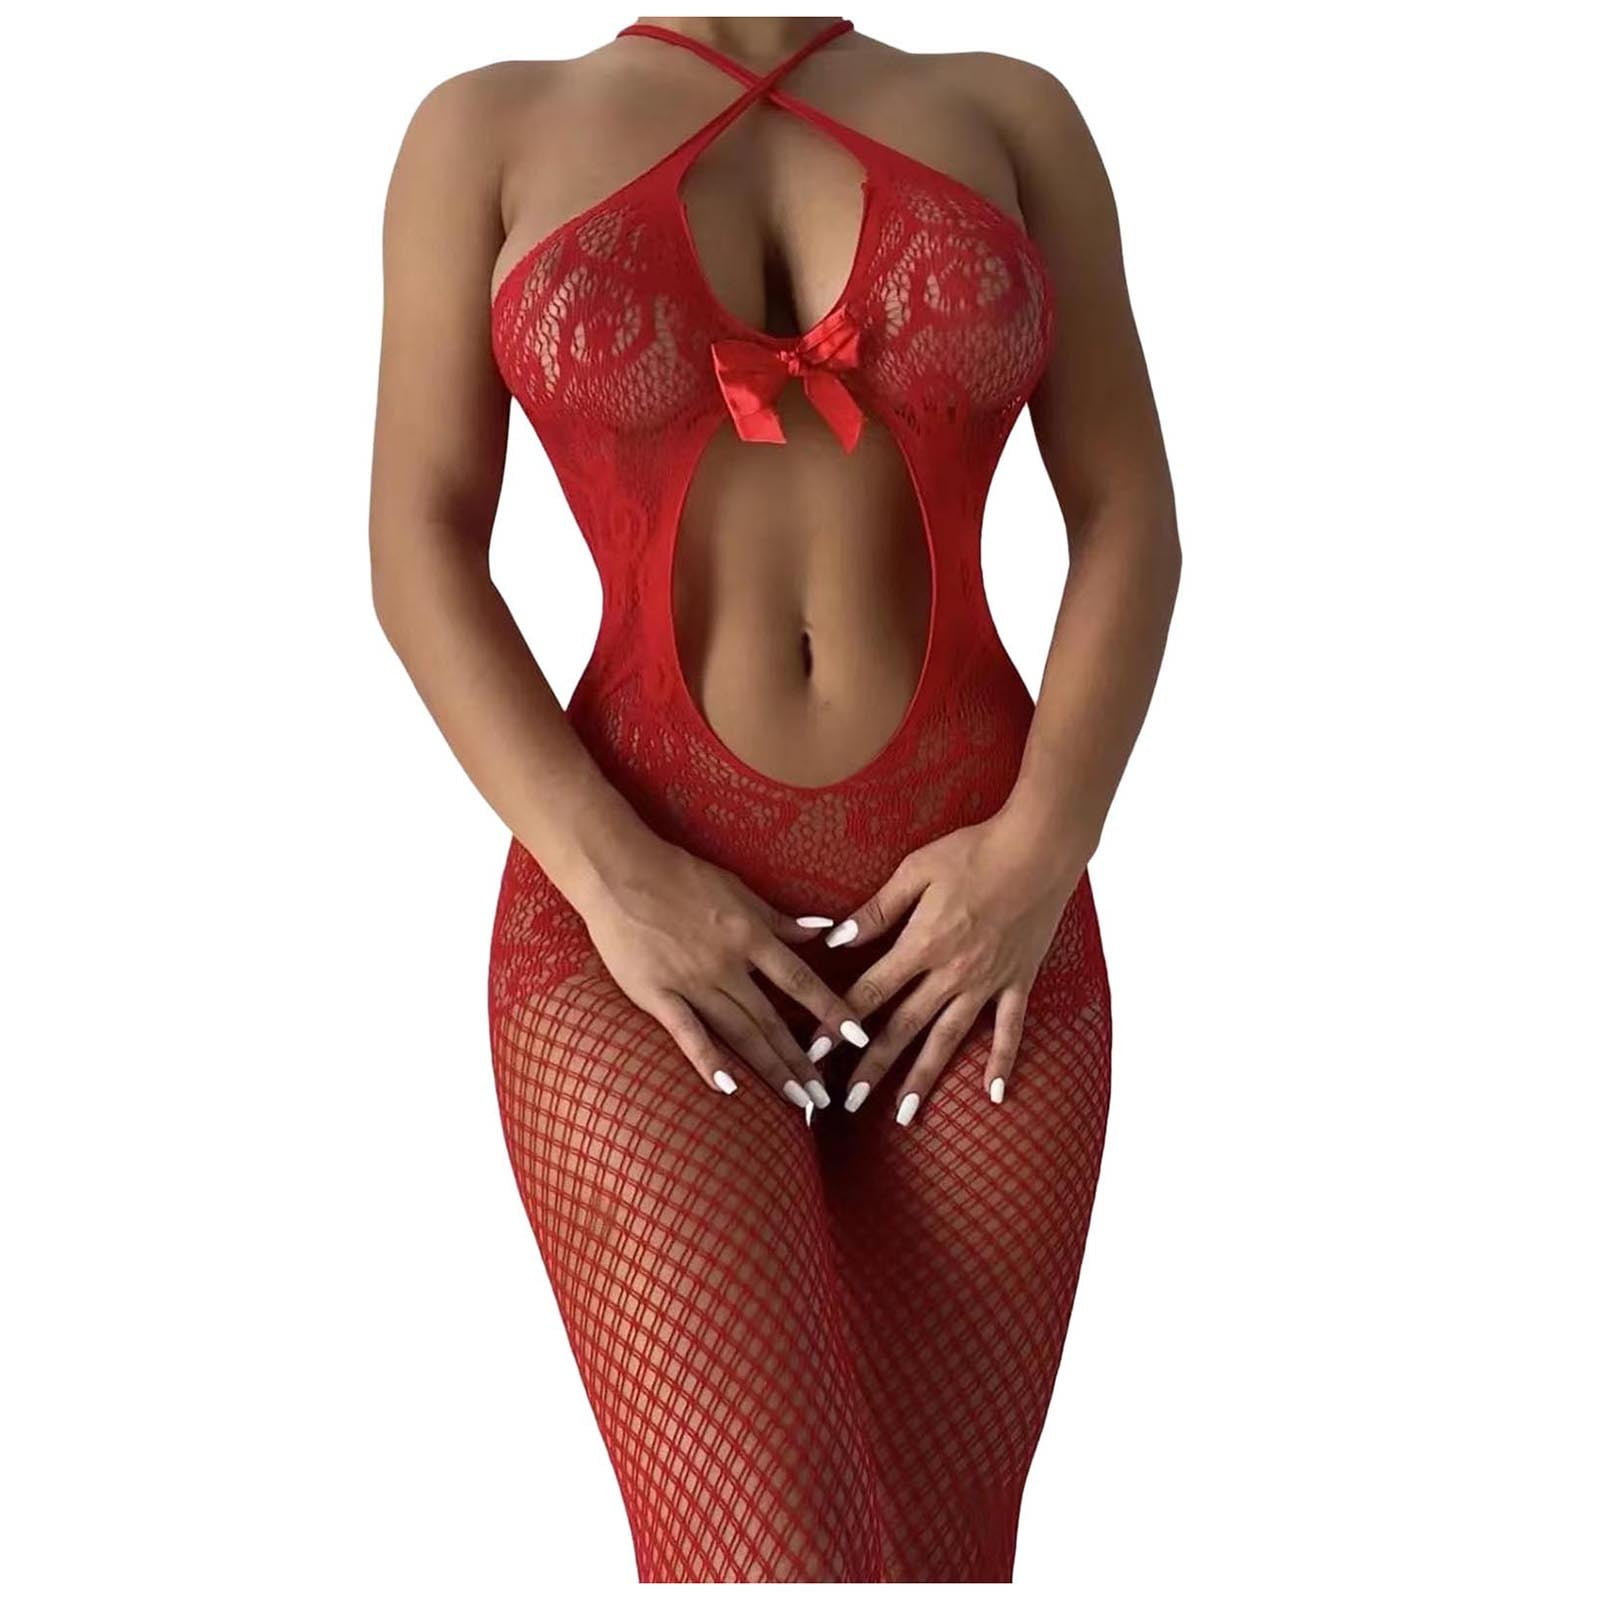 NECHOLOGY Fishnet Bodysuits Catsuit Womens Transparent See Through Full  Body Stockings Mesh Lingerie Delivery Tomorrow Underwear Red One Size 